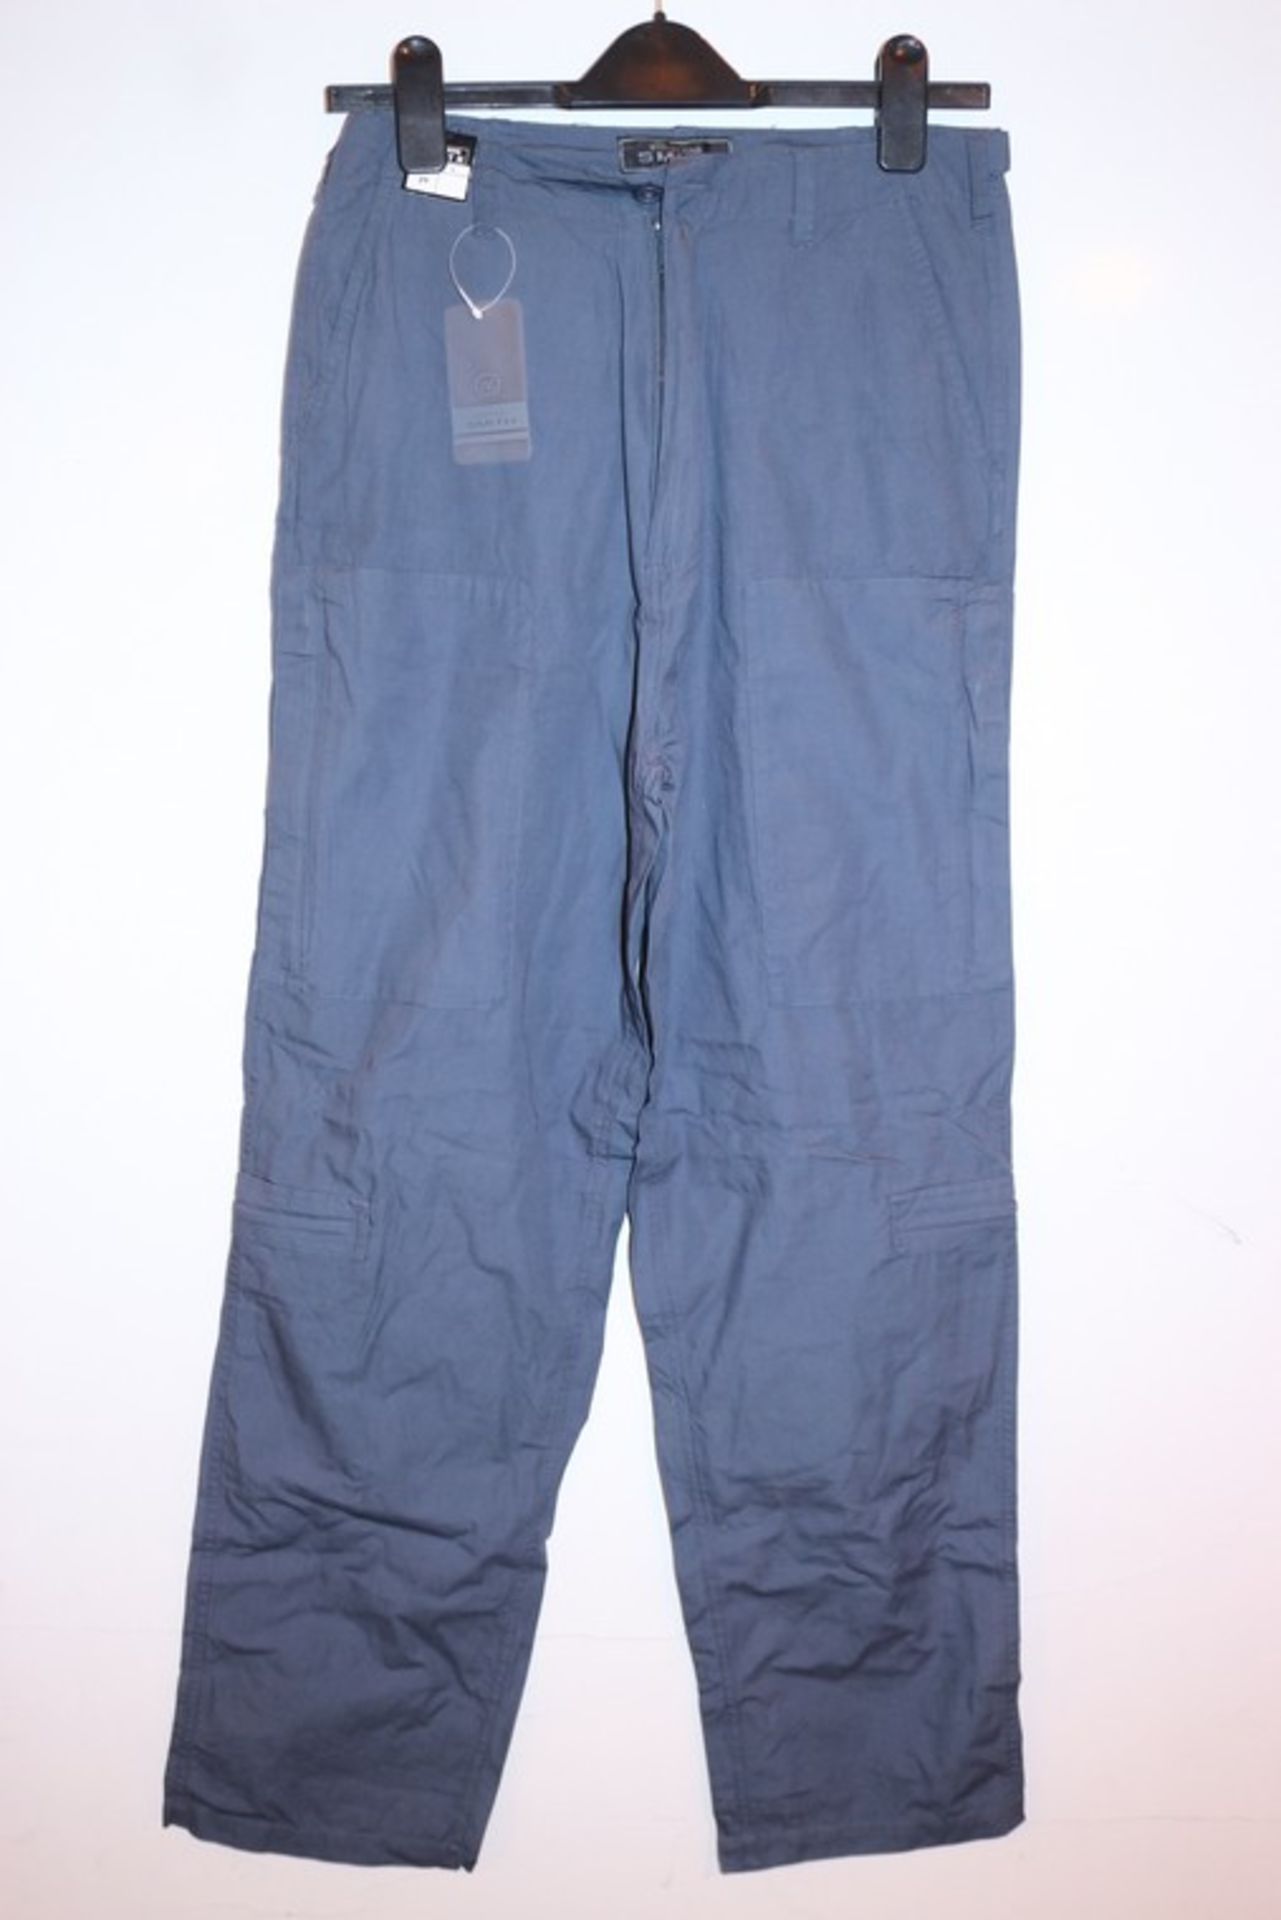 5 x PAIRS OF WHISPERING SMITH TROUSERS IN ASSORTED SIZES *PLEASE NOTE THAT THE BID PRICE IS